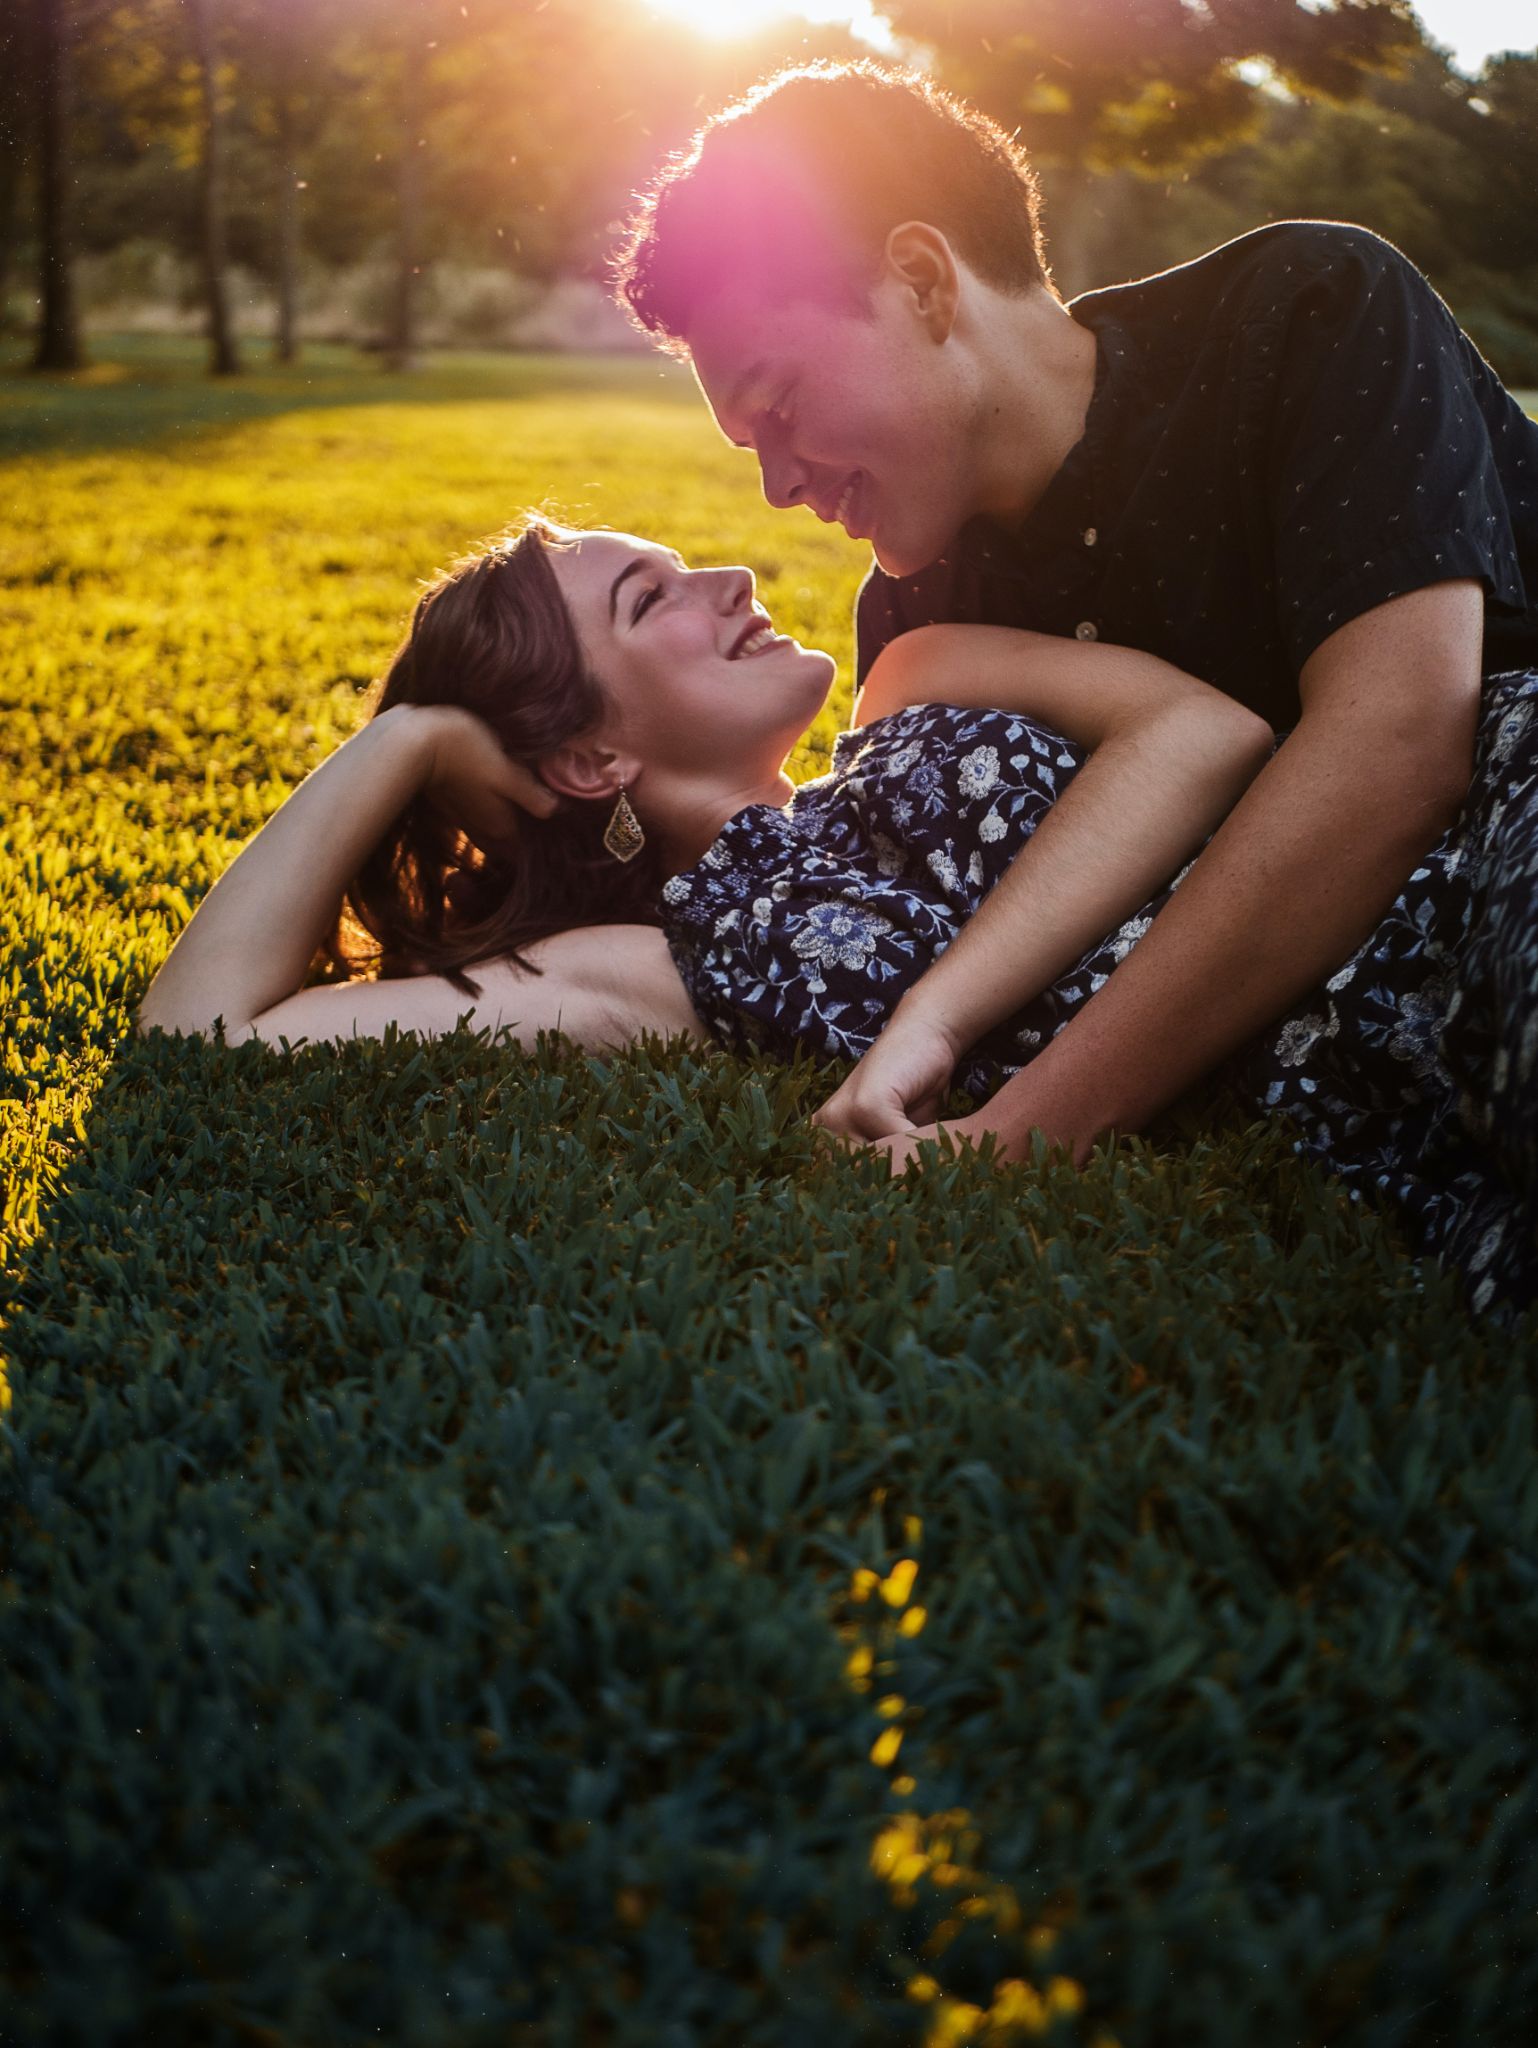 A picture of a woman lying on some grass, with a man lying next to her, looking at her lovingly, representing the phrase "I'm mad about you."